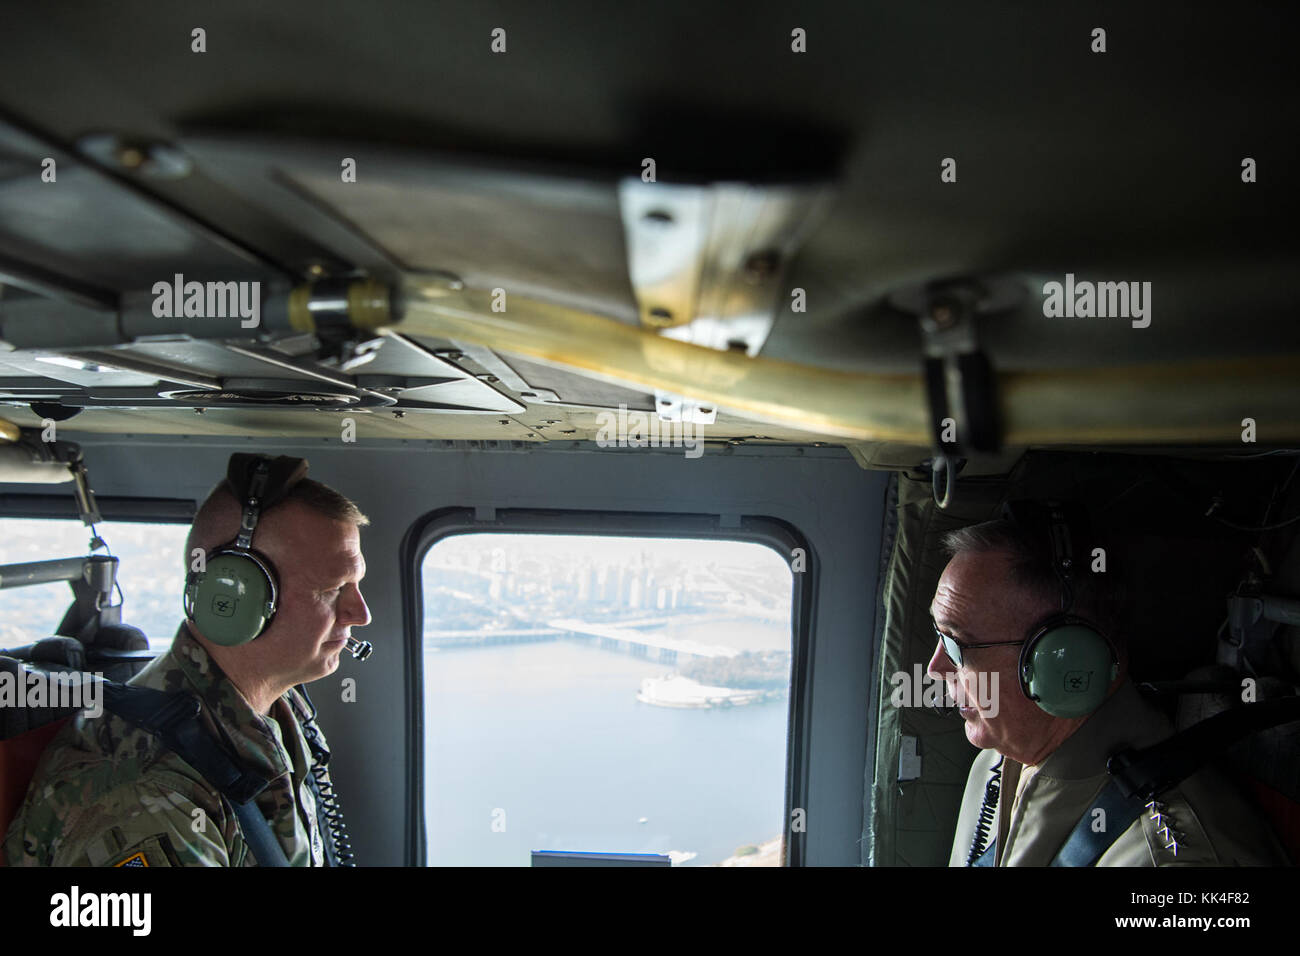 Marine Corps Gen. Joseph F. Dunford Jr., chairman of the Joint Chiefs of Staff, speaks with Army Command Sgt. Maj. John W. Troxell, senior enlisted advisor to the chairman of the Joint Chiefs of Staff, during a helo ride aboard an MH-60 Blackhawk above Seoul, Republic of Korea, Oct. 28, 2017. (DOD photo by Navy Petty Officer 1st Class Dominique A. Pineiro) Stock Photo